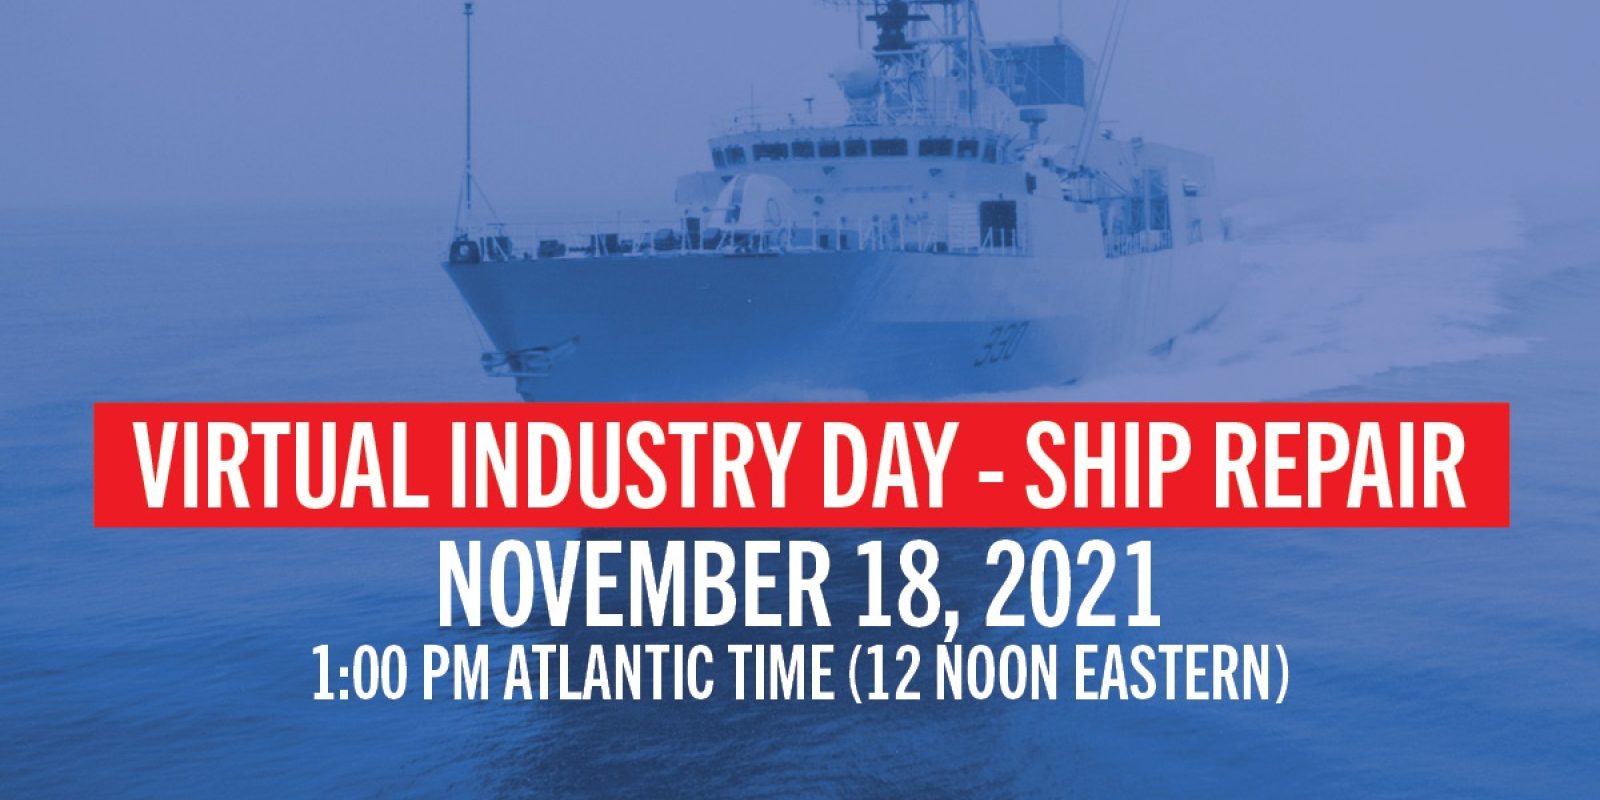 Ship Repair Industry Day Irving Shipbuilding